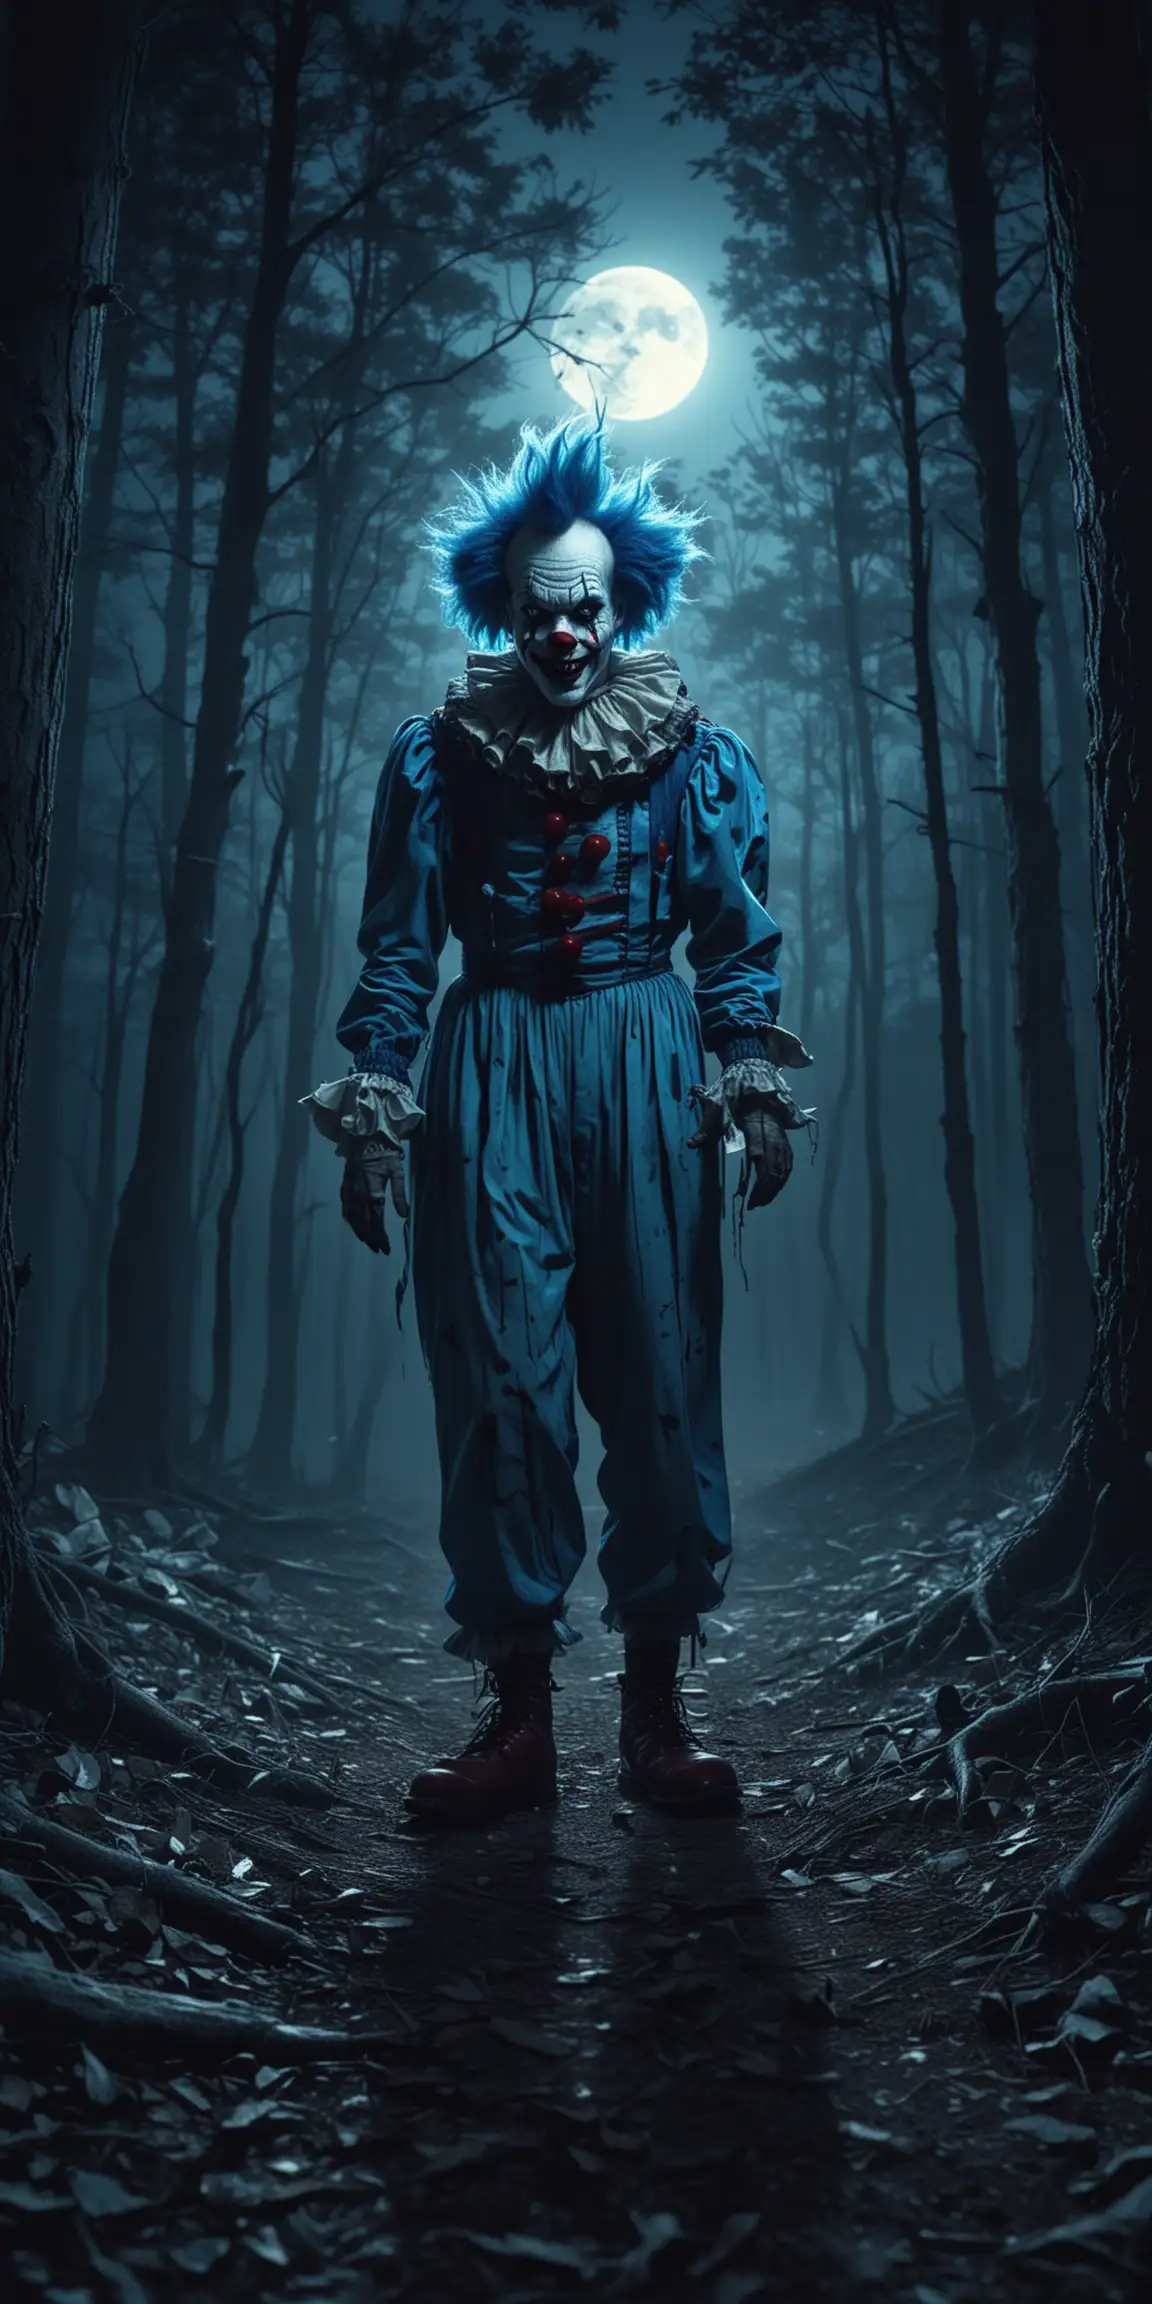 Eerie Clown in Moonlit Forest Spooky Nighttime Scene with Blue Shadows